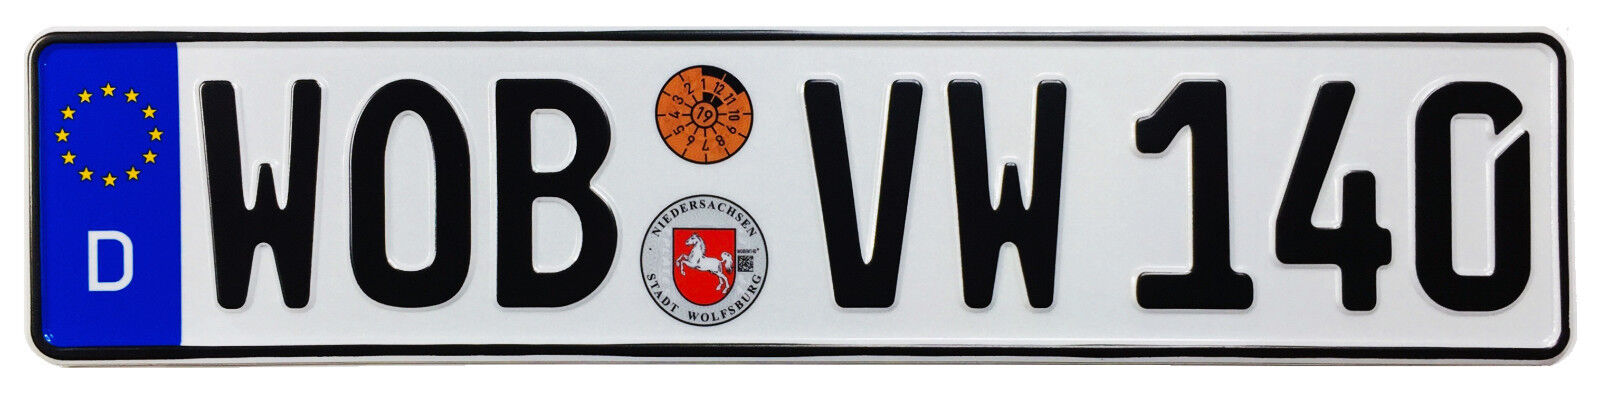 VW Wolfsburg Rear German License Plate (WOB) by Z Plates with Unique Number NEW